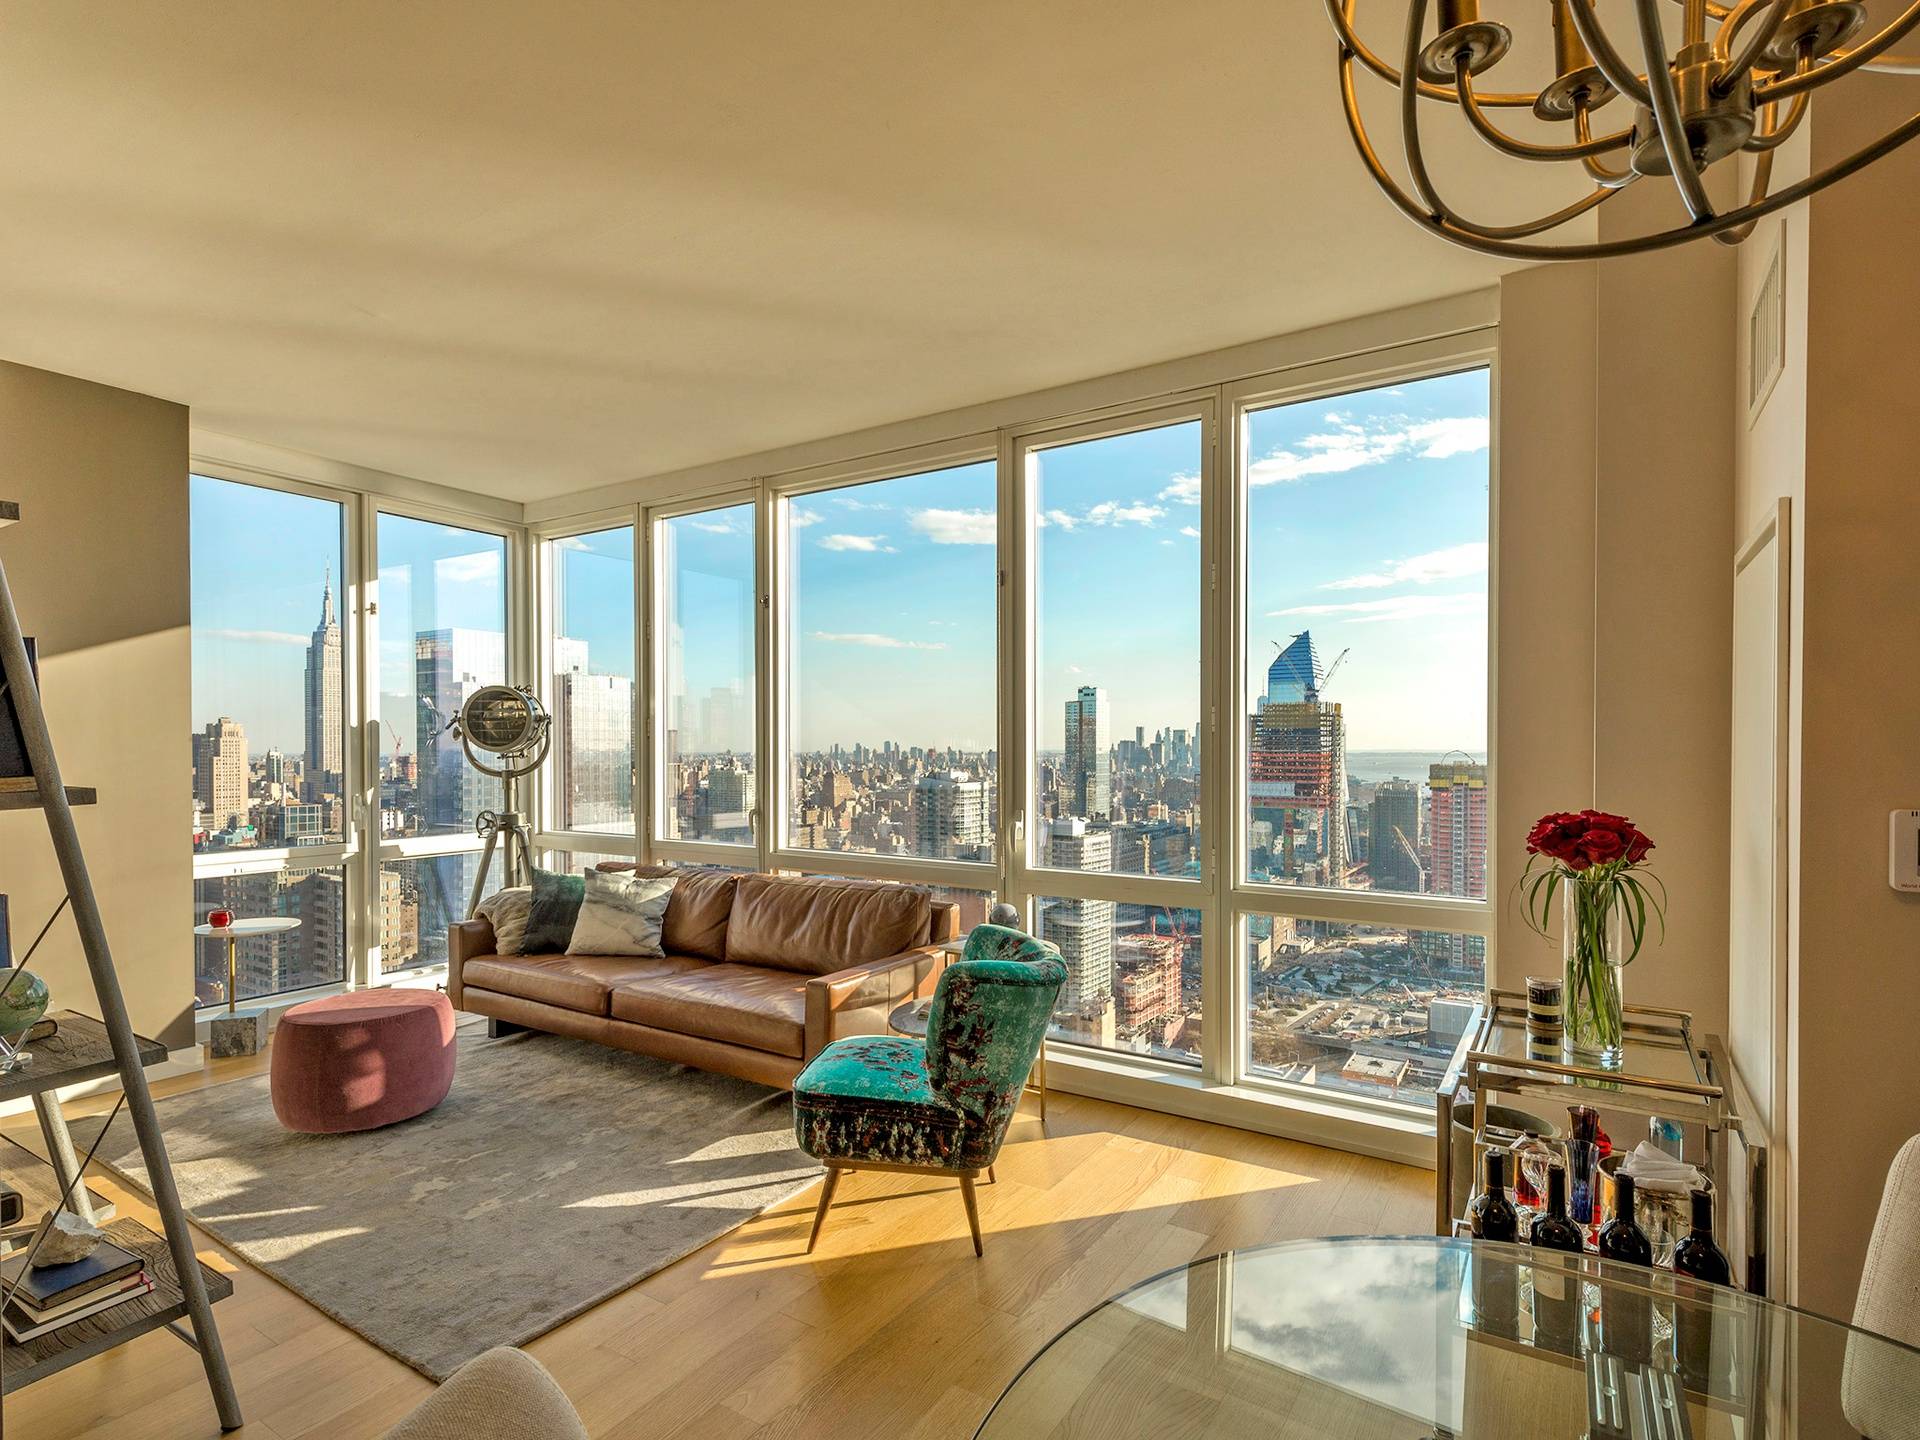 NO FEE High Floor Corner 1 Bed 1 Bath at SKY BUILDING in Midtown West! Gorgeous Views and Over-the-top Amenities!